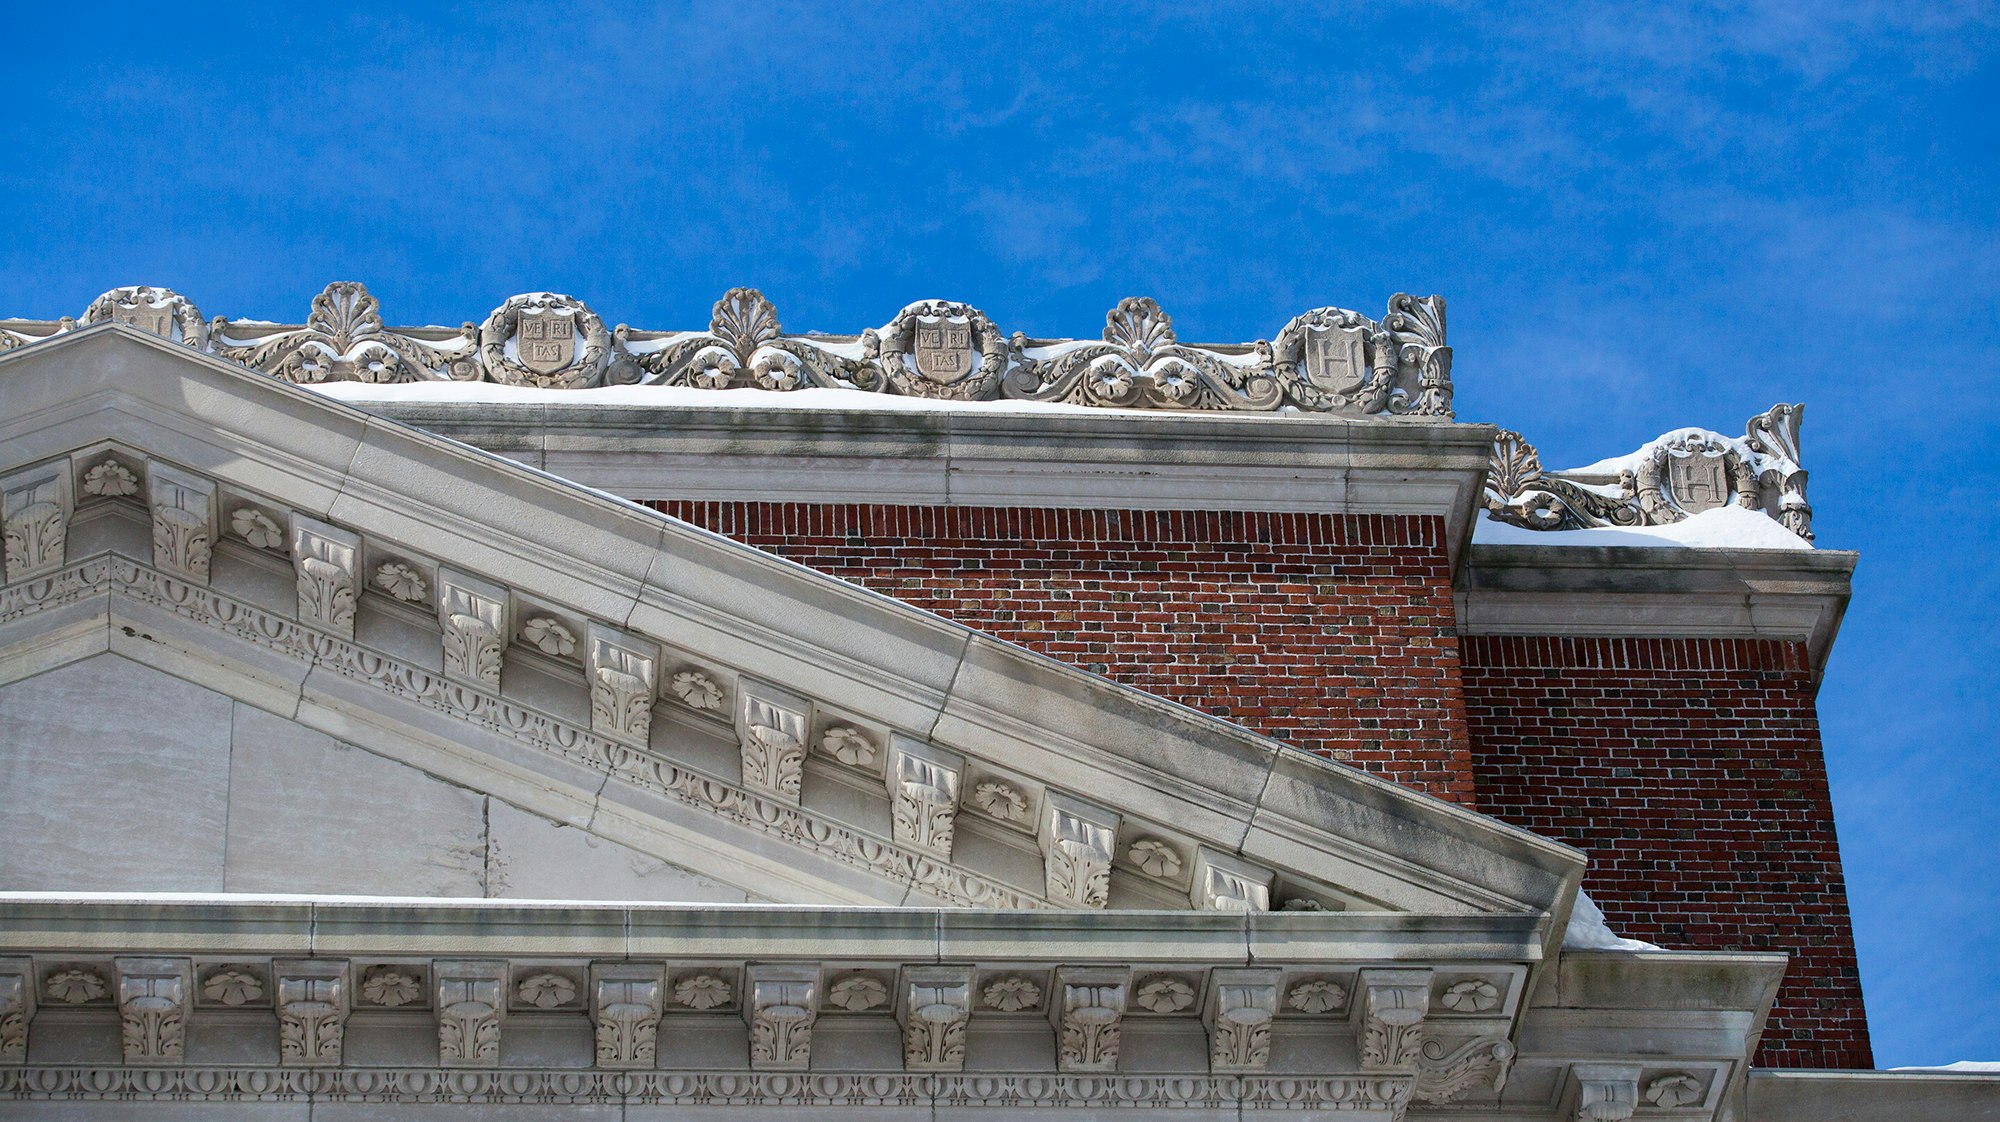 stone roofline with repeating motif of Harvard shield